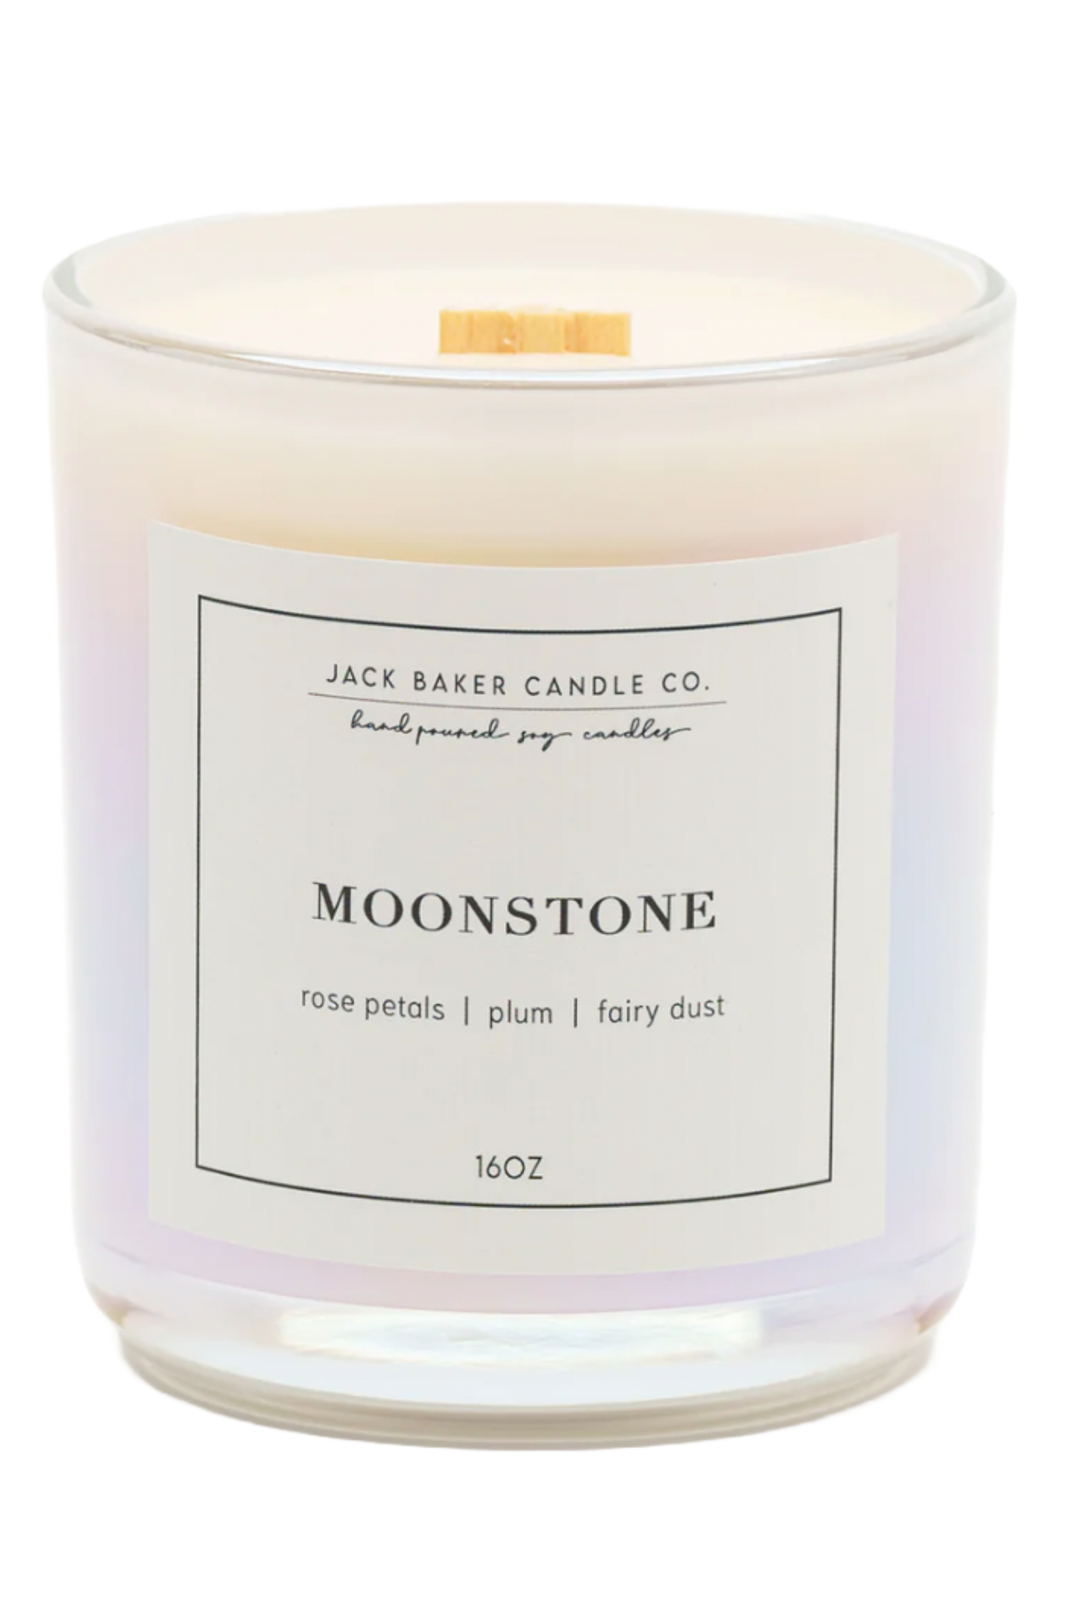 "Moonstone" Candle